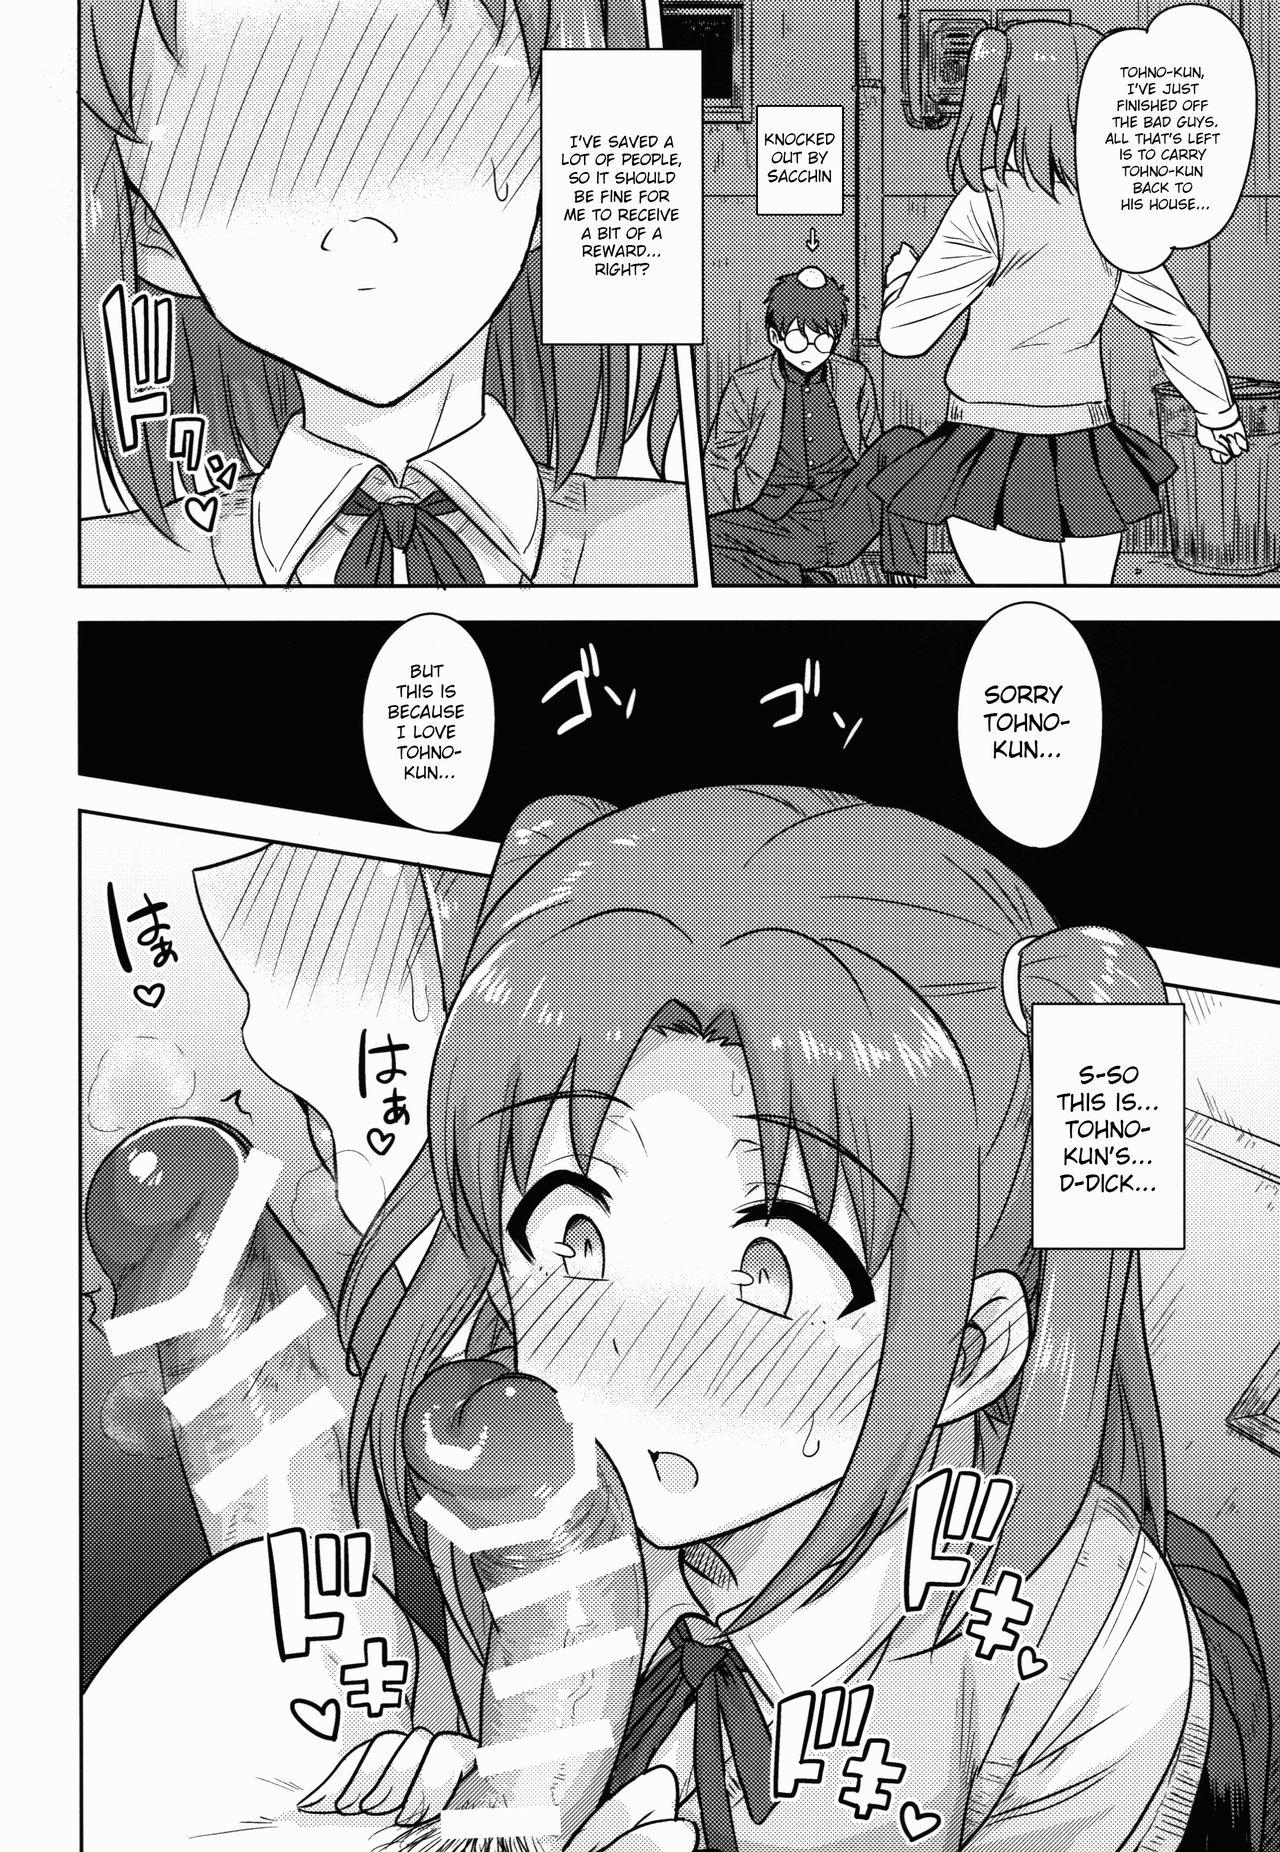 Imvu Aru Hi no Futari MelBlo Hen | A Certain Day with Each Other Melty Blood Hen - Tsukihime Candid - Page 9